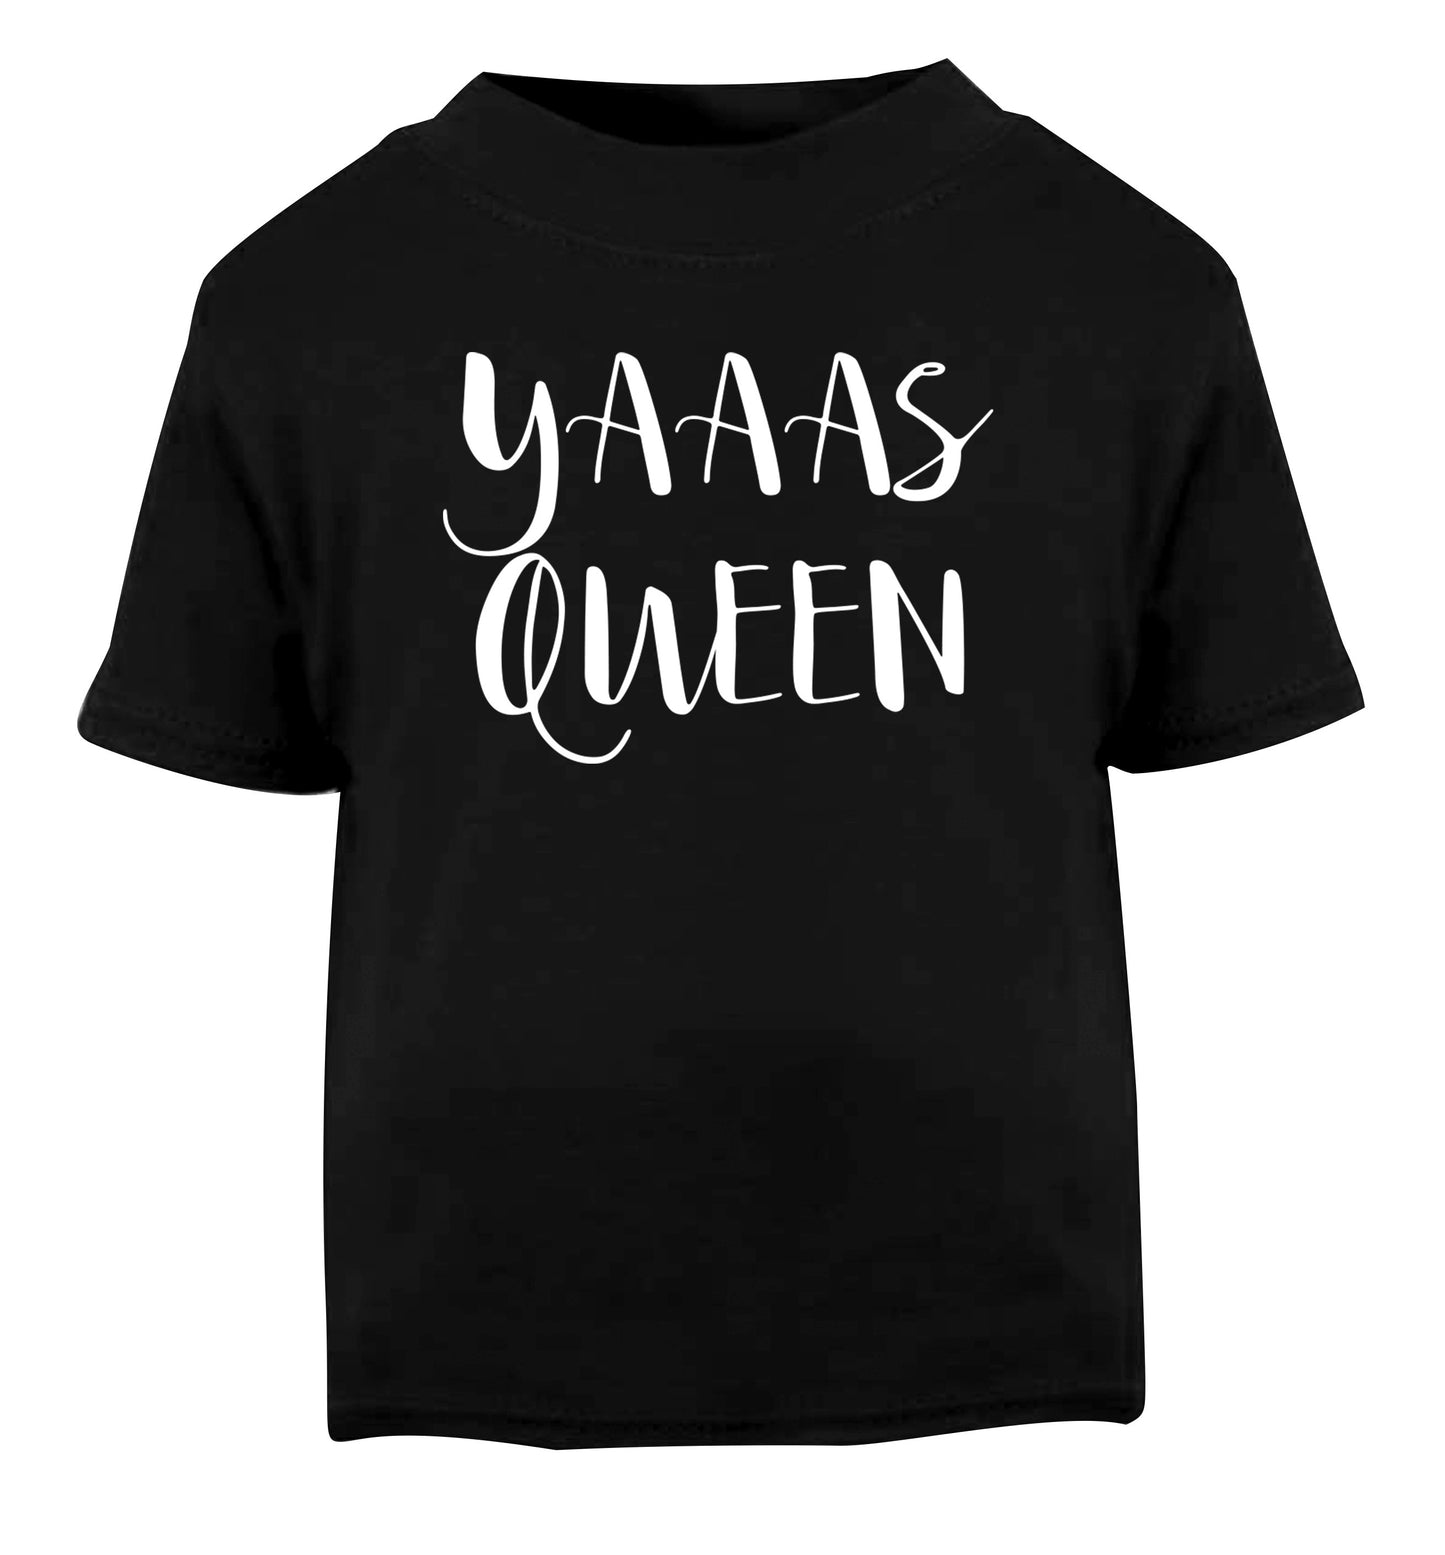 Yas Queen Black Baby Toddler Tshirt 2 years